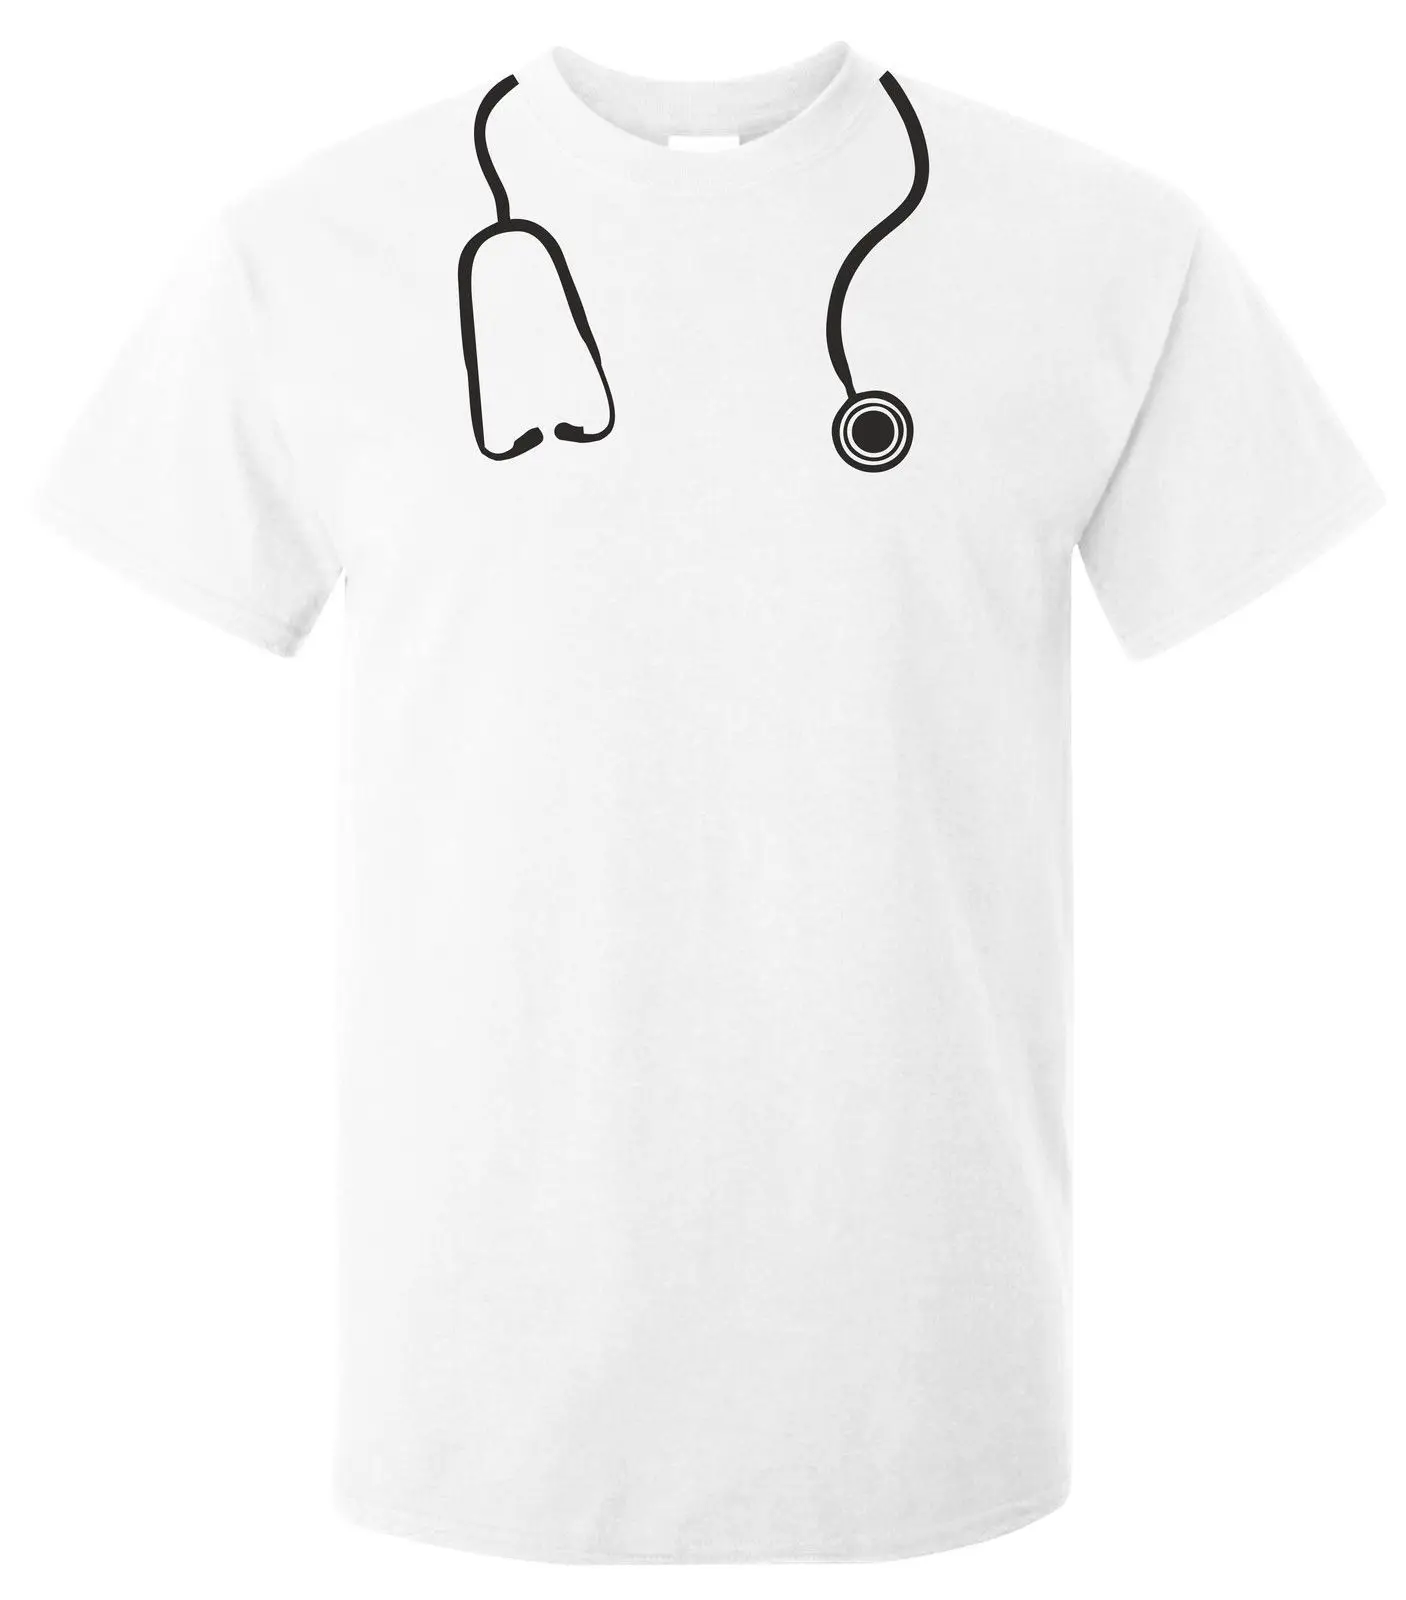 

Stethoscope T-Shirt Funny t shirts Doctor medical fancy dress party cool nurse Casual Cotton short sleeve Tee Shirt Homme